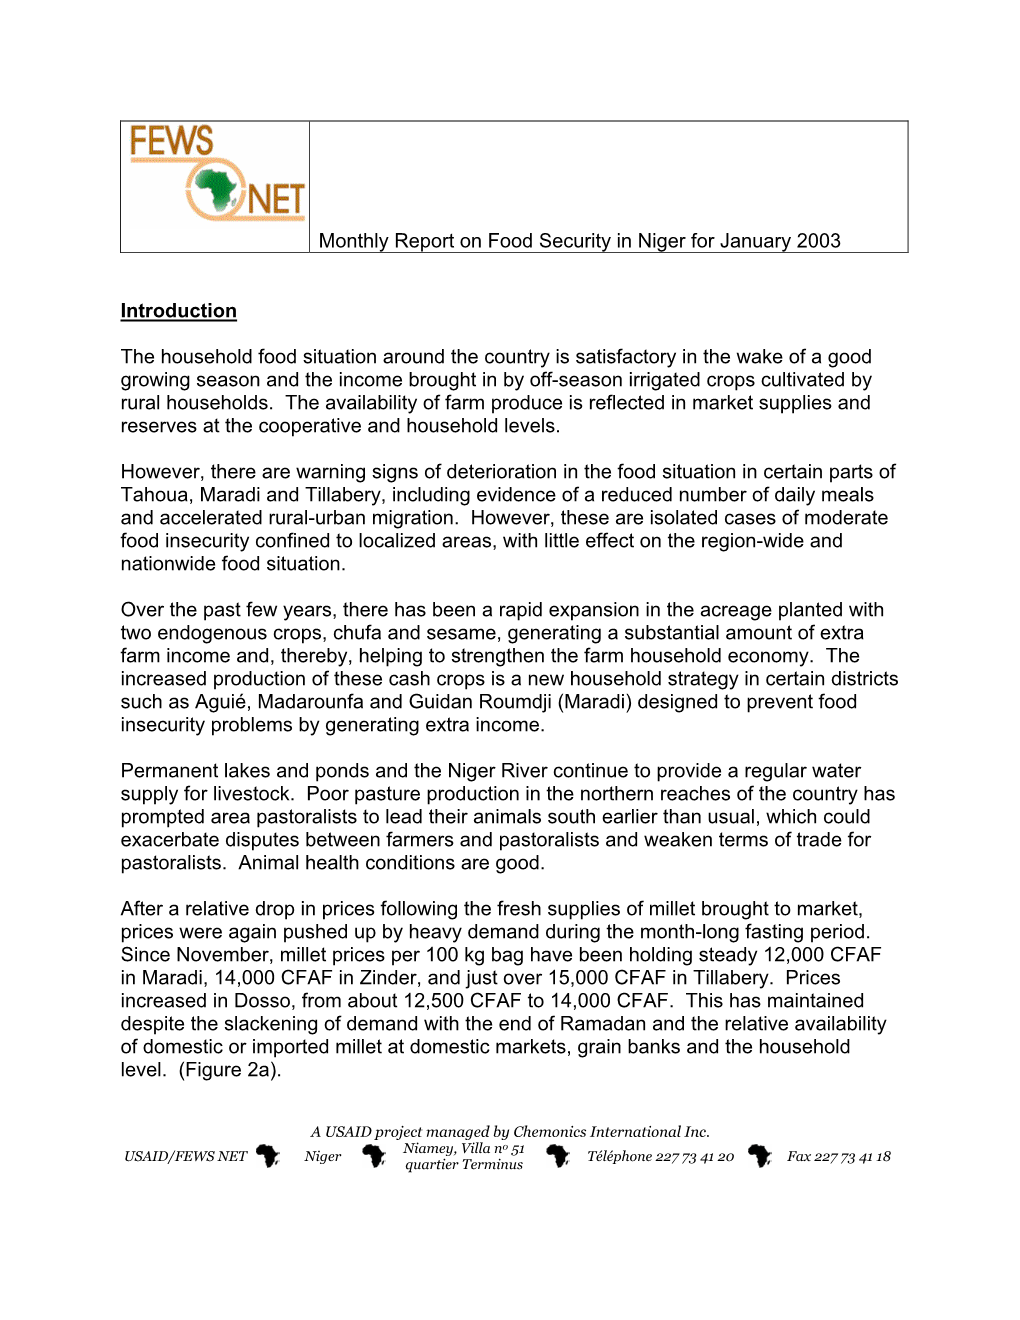 Monthly Report on Food Security in Niger for January 2003 Introduction the Household Food Situation Around the Country Is Satisf